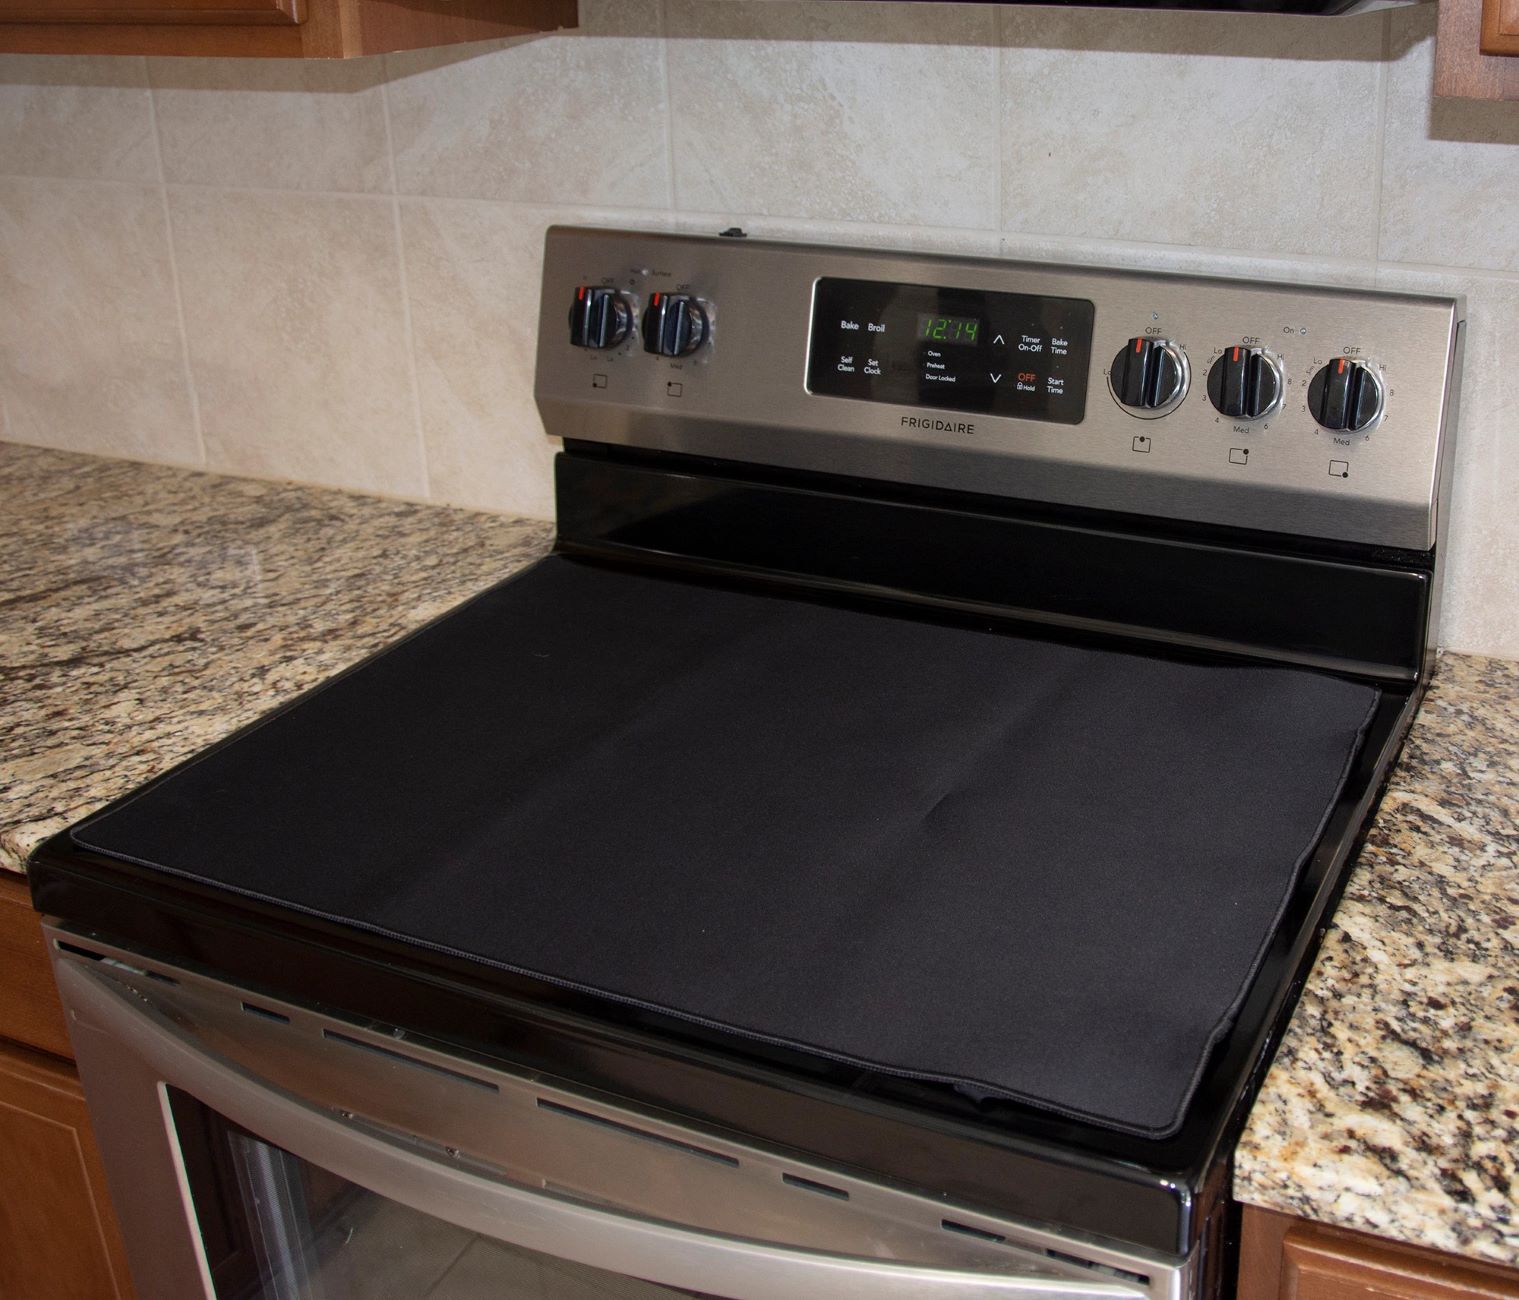 How To Protect Glass Stove Top From Scratching